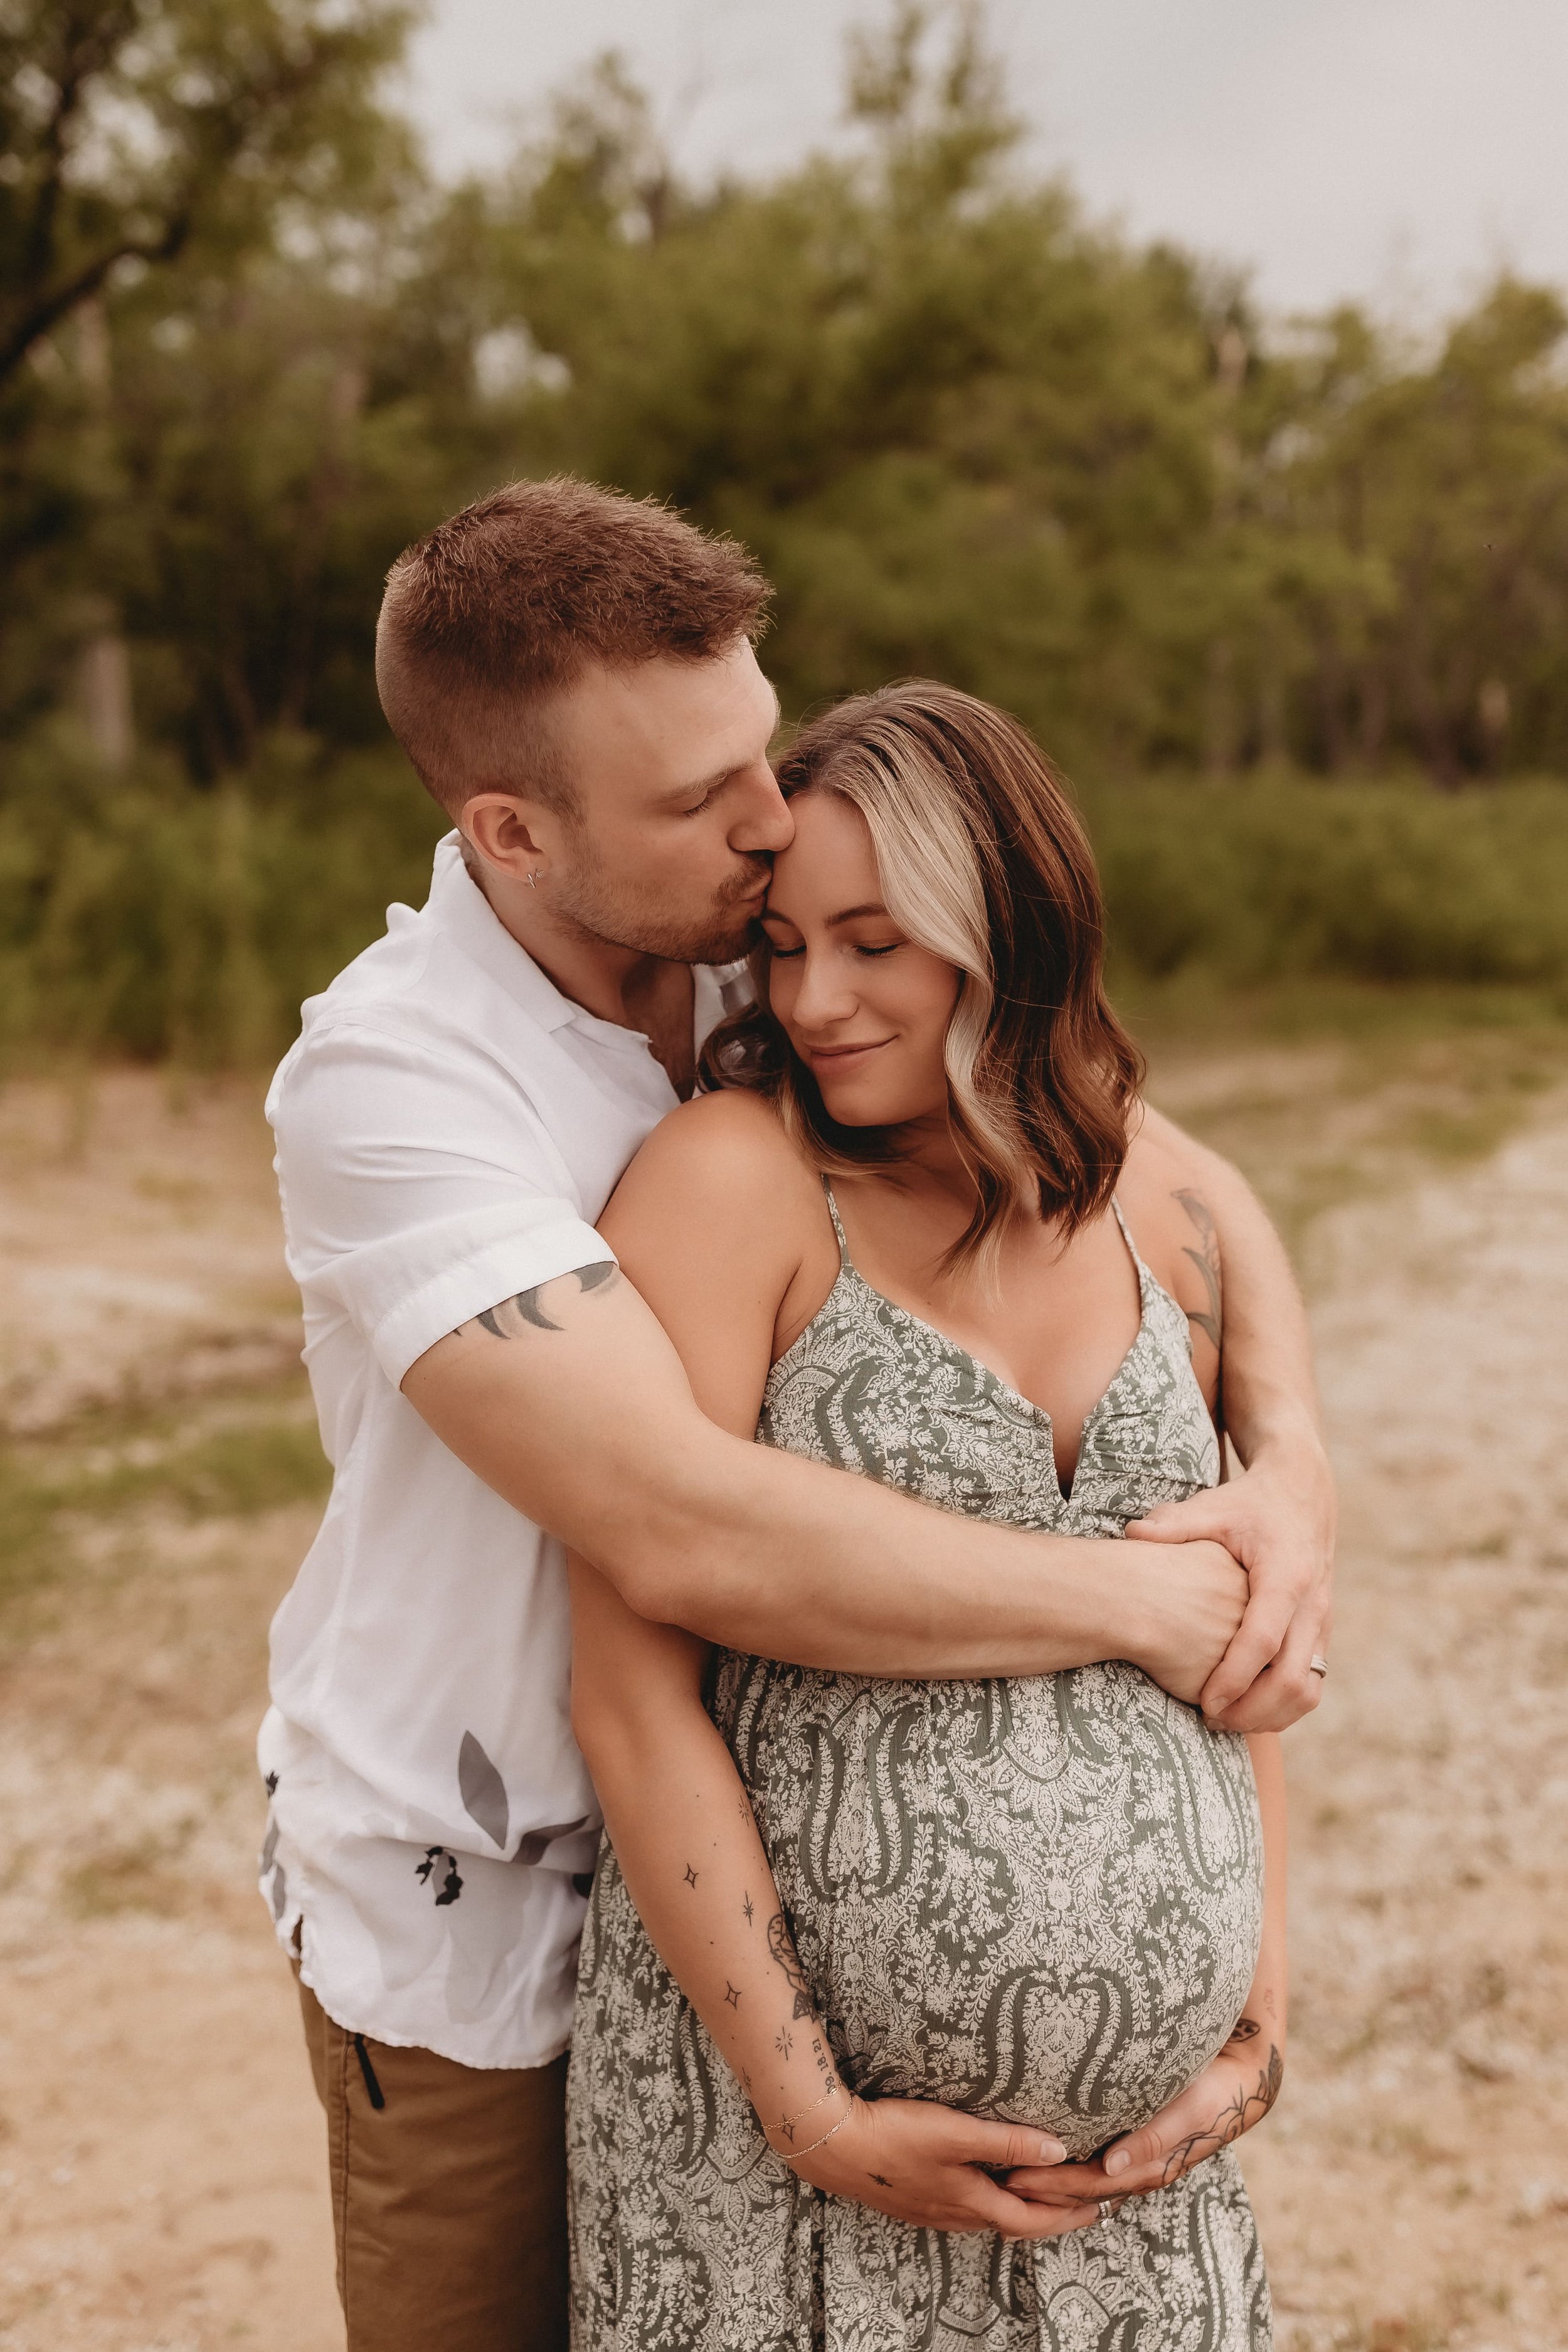  a dad-to-be presses a kiss to his pregnant wife’s forehead during a maternity shoot photographer session 